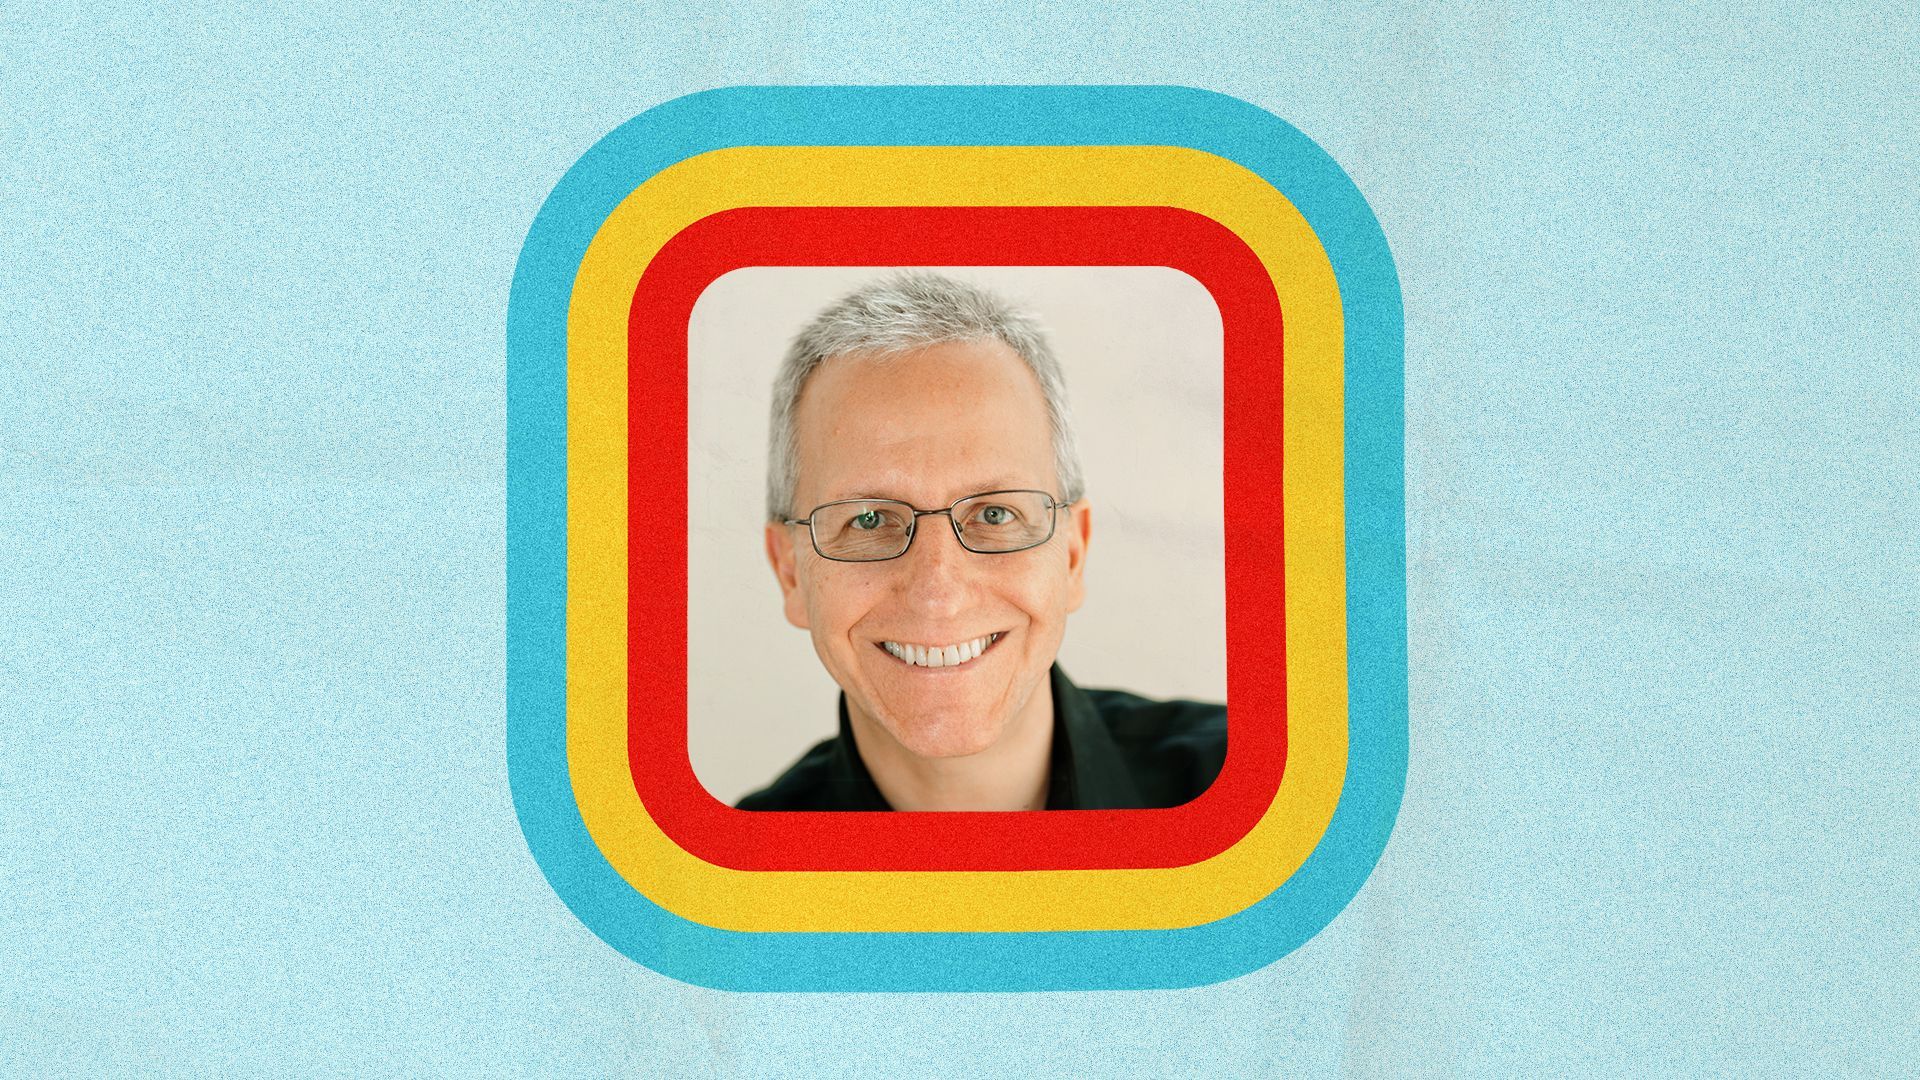 an illustration of MIke Verdu from Netflix surrounded by rounded rectangular lines